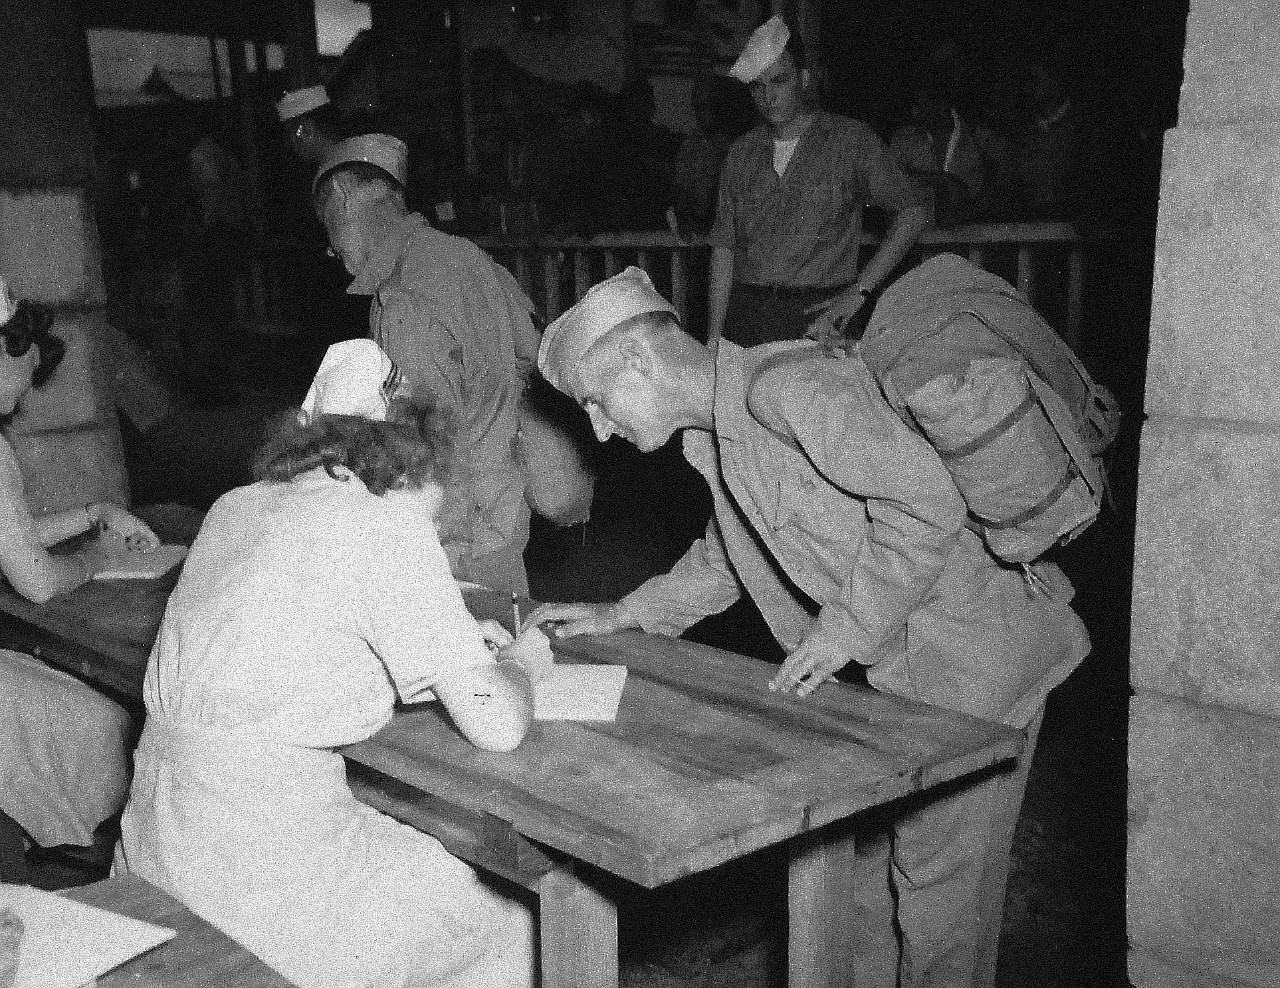 80-G-346552:  Allied Prisoners of War, 1945.    J. Payne, who was a British Prisoner of War on Koyagi Island prison camp, is now going through the liberation routine at the Nagasaki Evacuation Center.  He is giving his history to nurse Harriet Fly, which is the first step at the processing center. Photographed by crew of USS Chenango (CVE 28), 13 September 1945.  Official U.S. Navy photograph, now in the collections of the National Archives.   (2014/11/5).